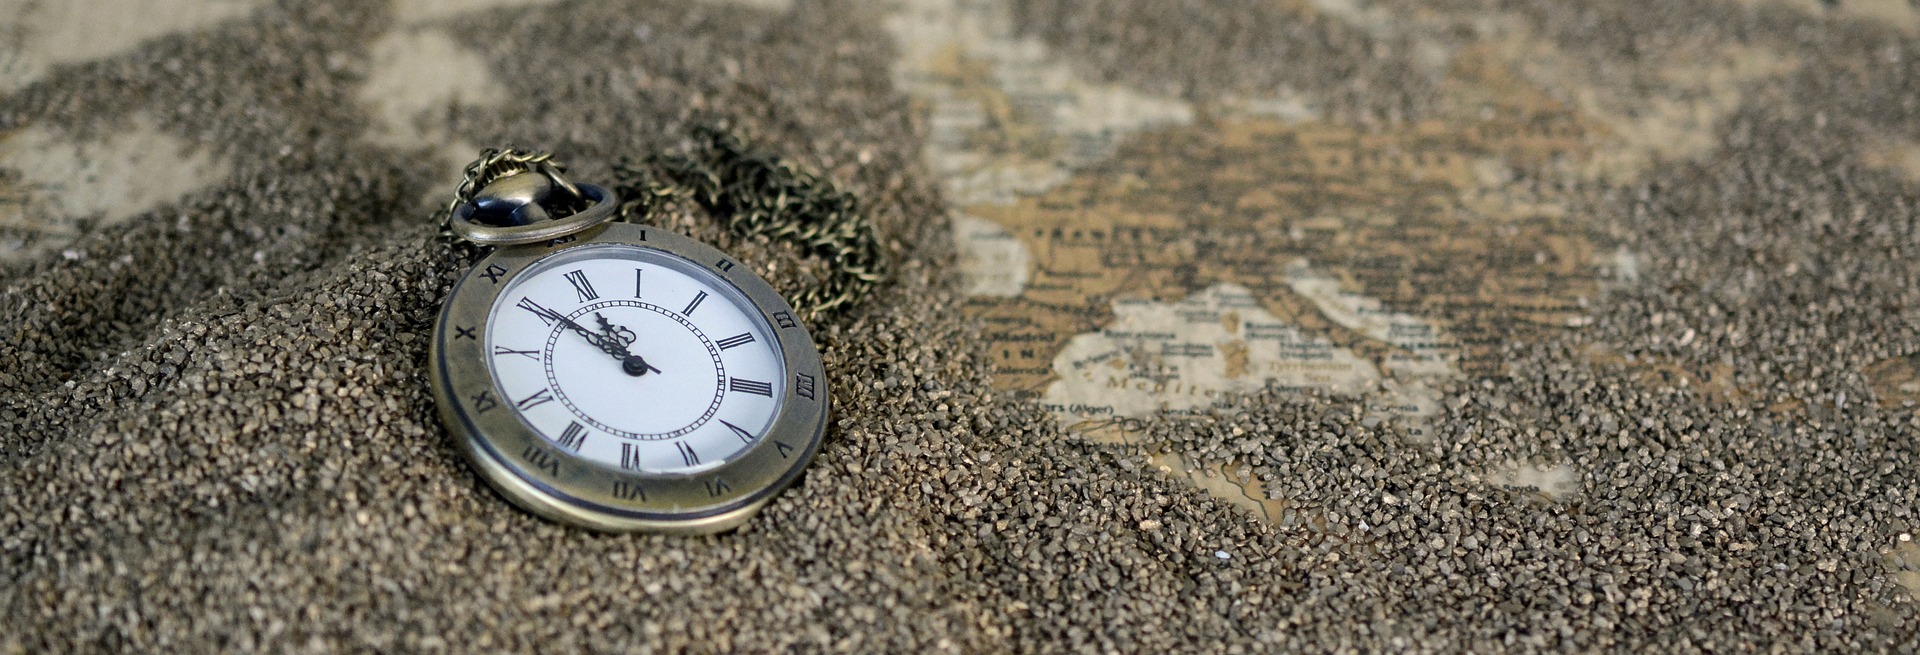 stop watch on sand